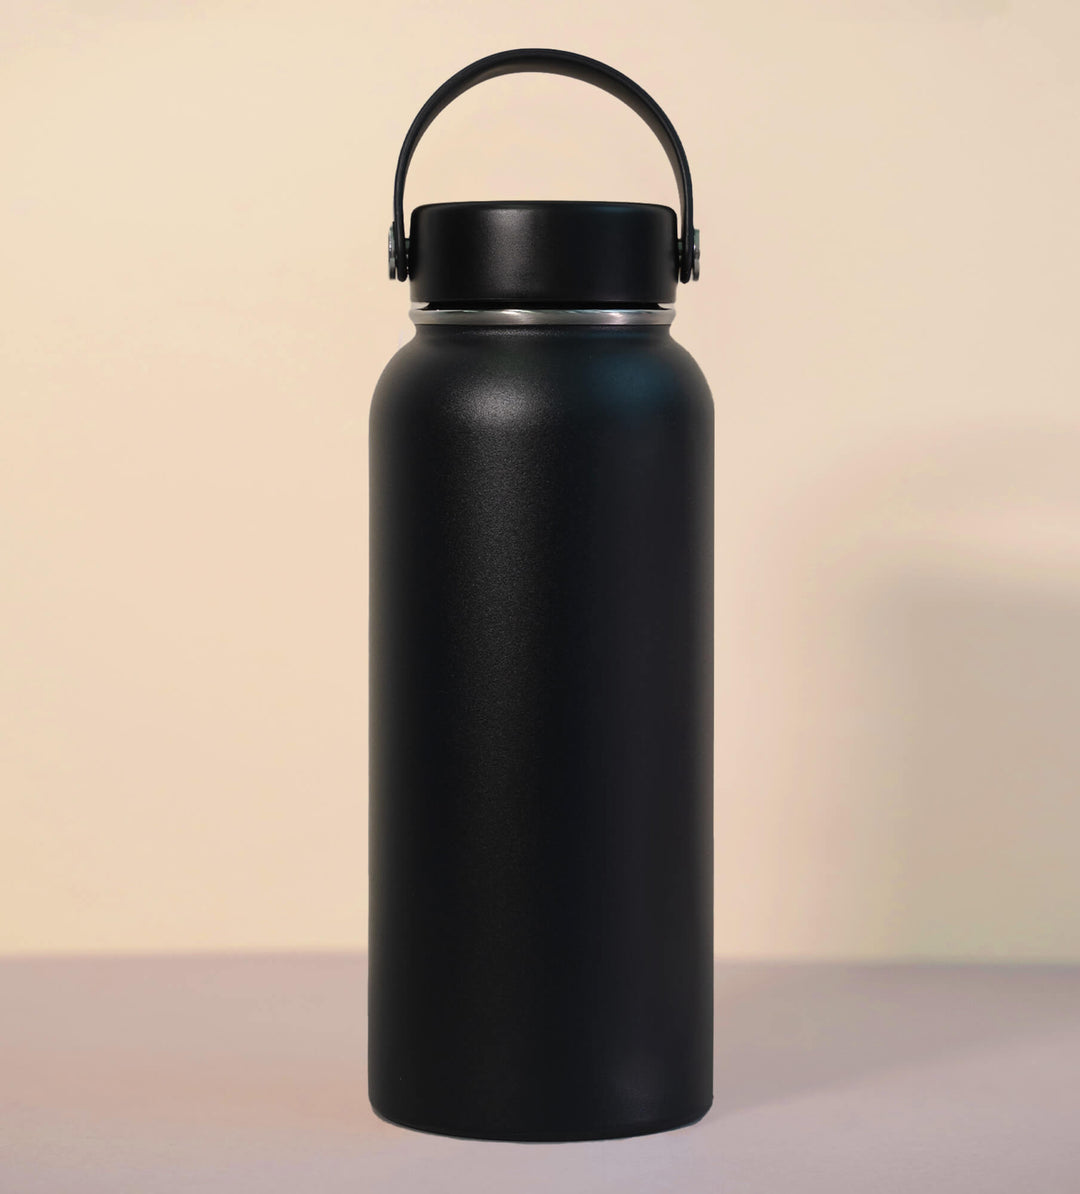 Hiro 32oz Thermal Stainless Steel Water Bottle